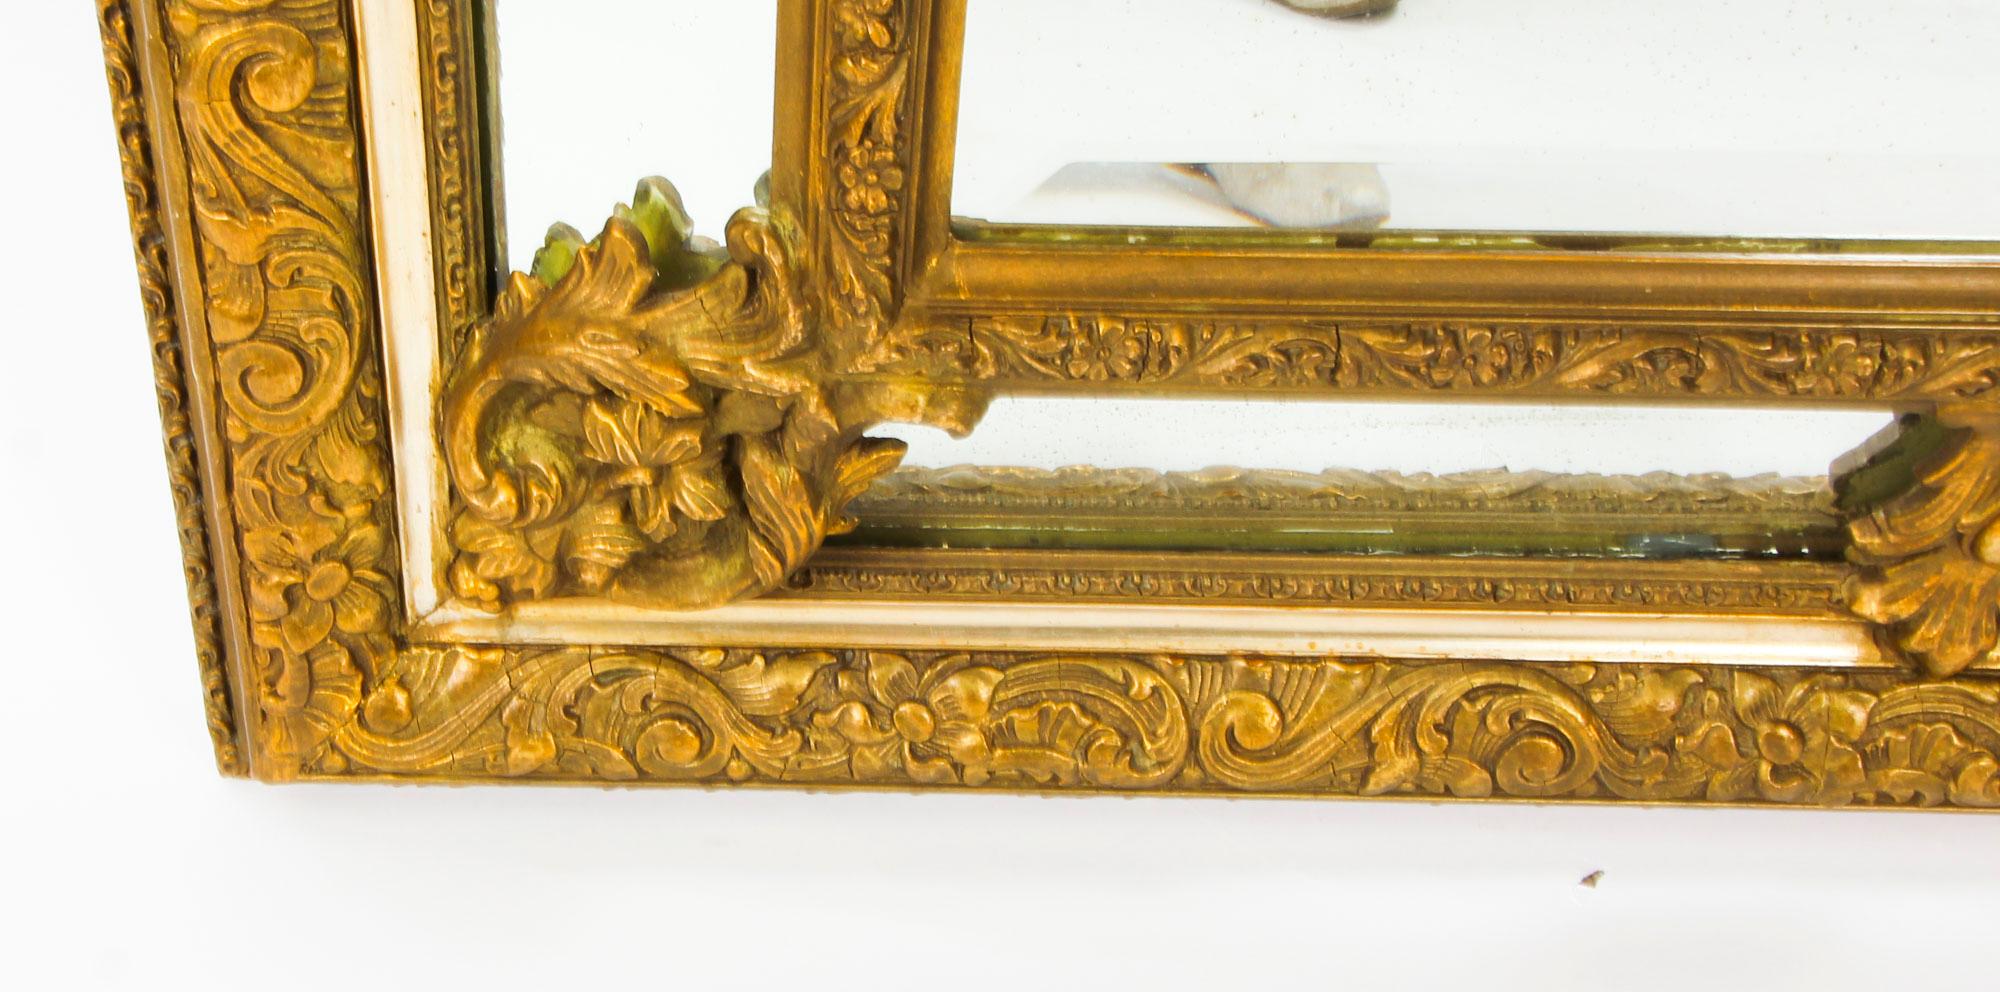 Antique French Giltwood Overmantel Louis Revival Mirror, 19th Century For Sale 2